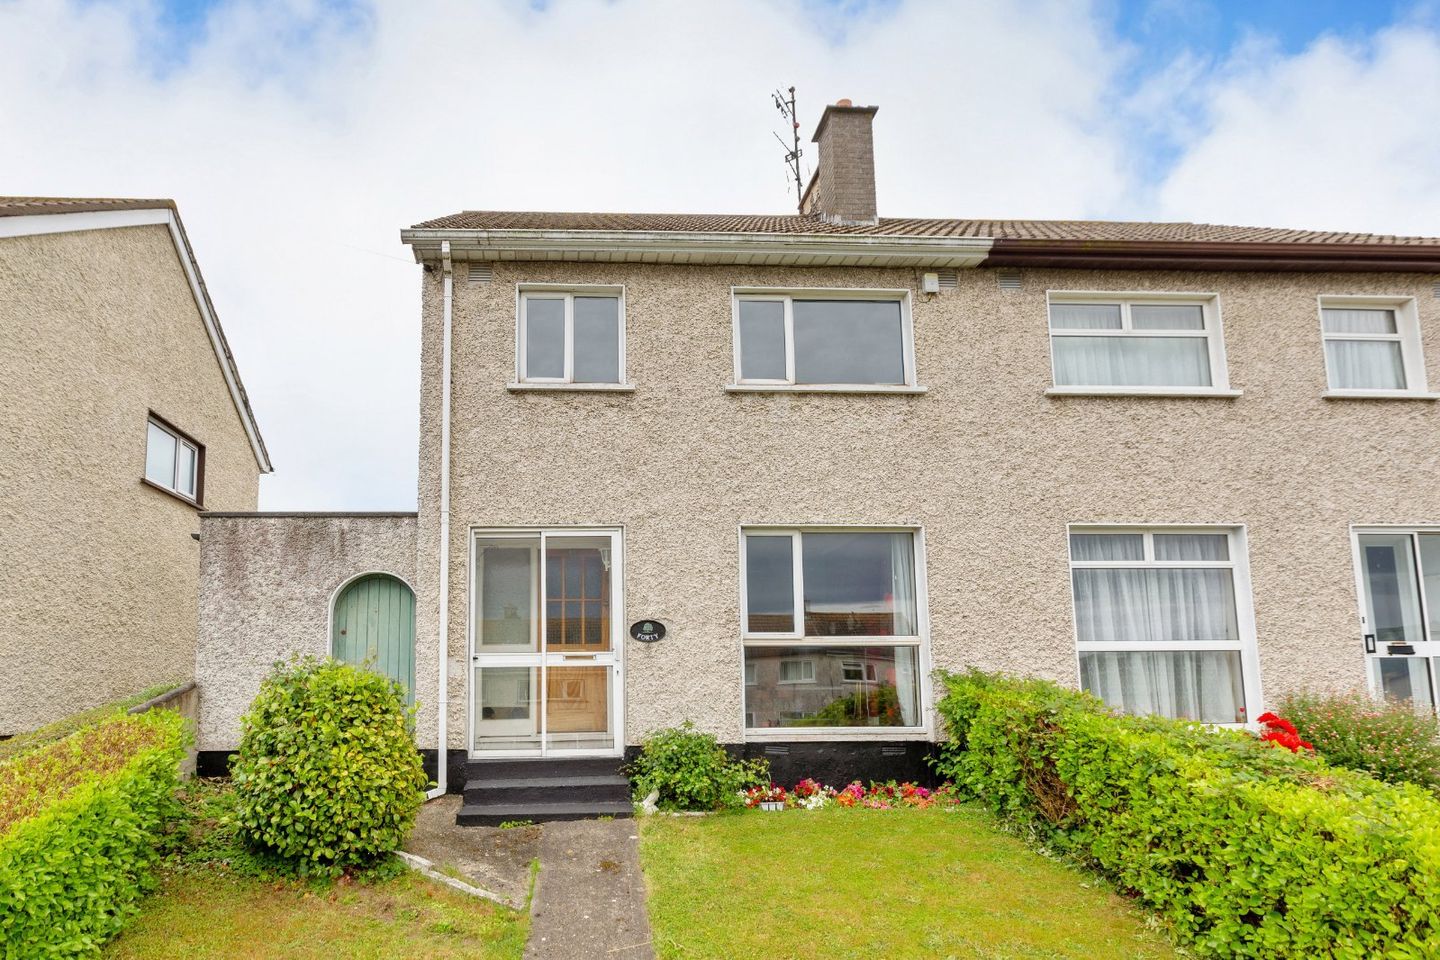 40 St Laurences Park, Wicklow Town, Co. Wicklow, A67KP04